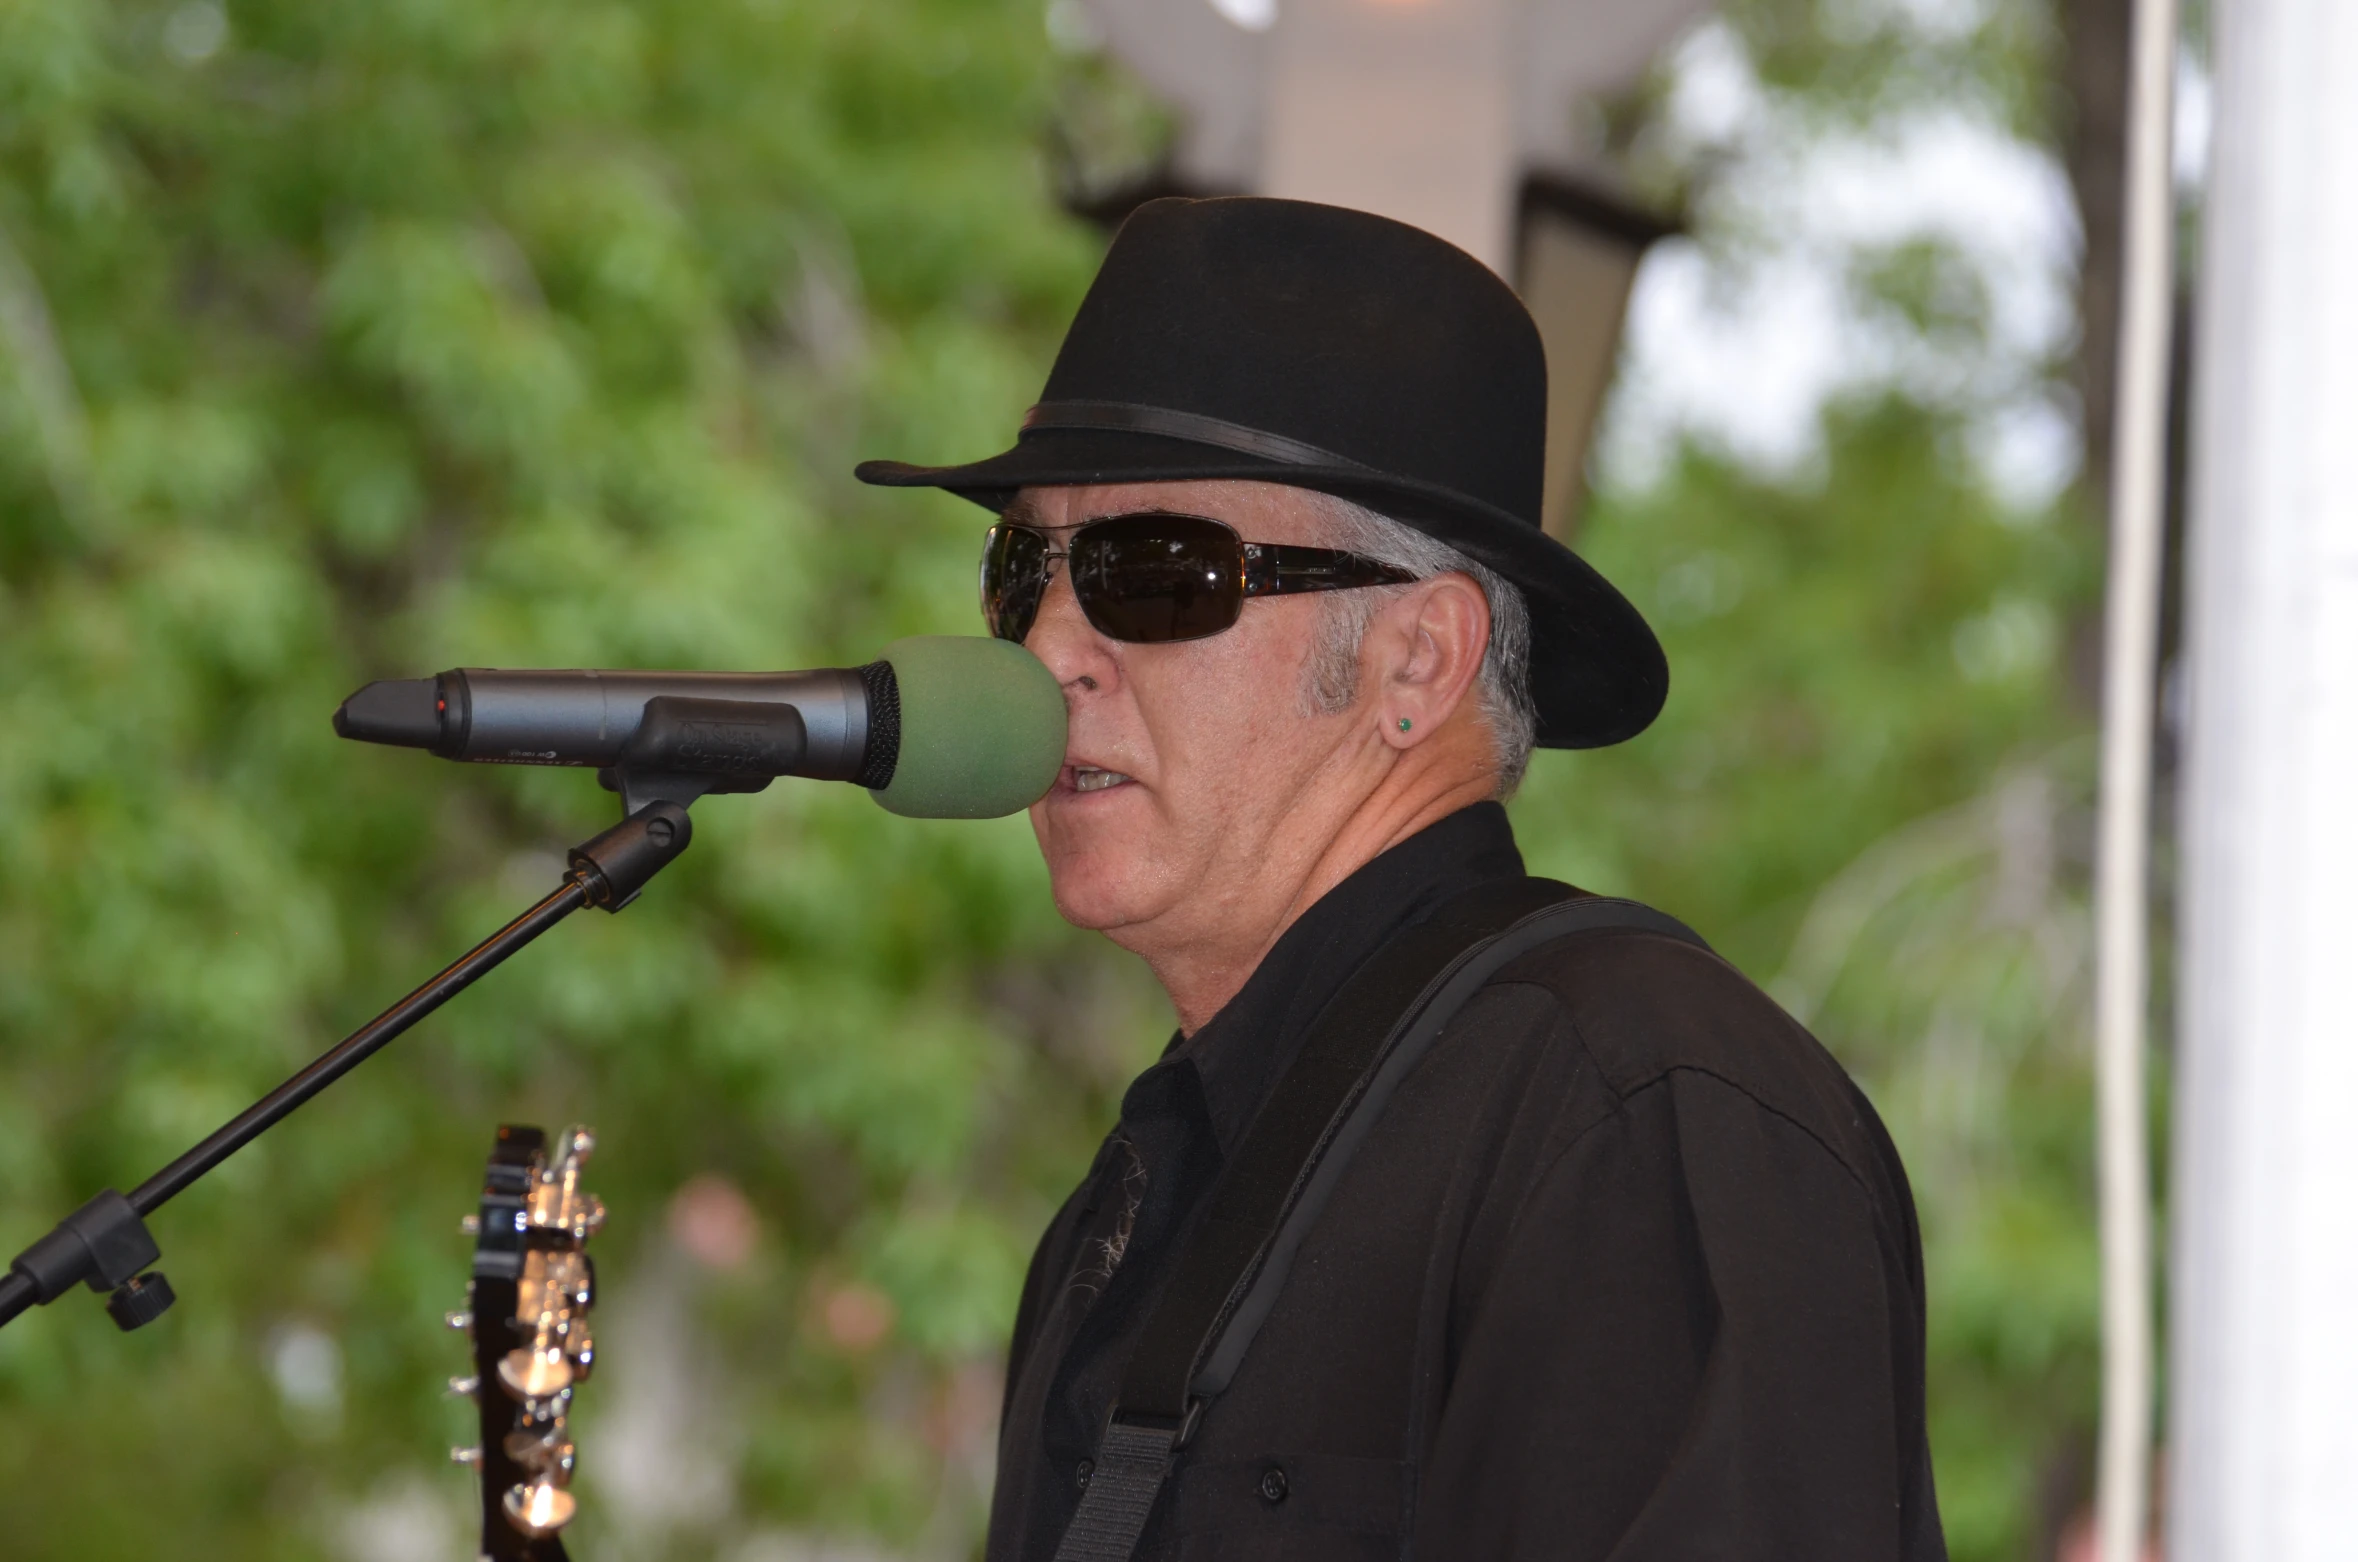 a man singing into a microphone, wearing sunglasses